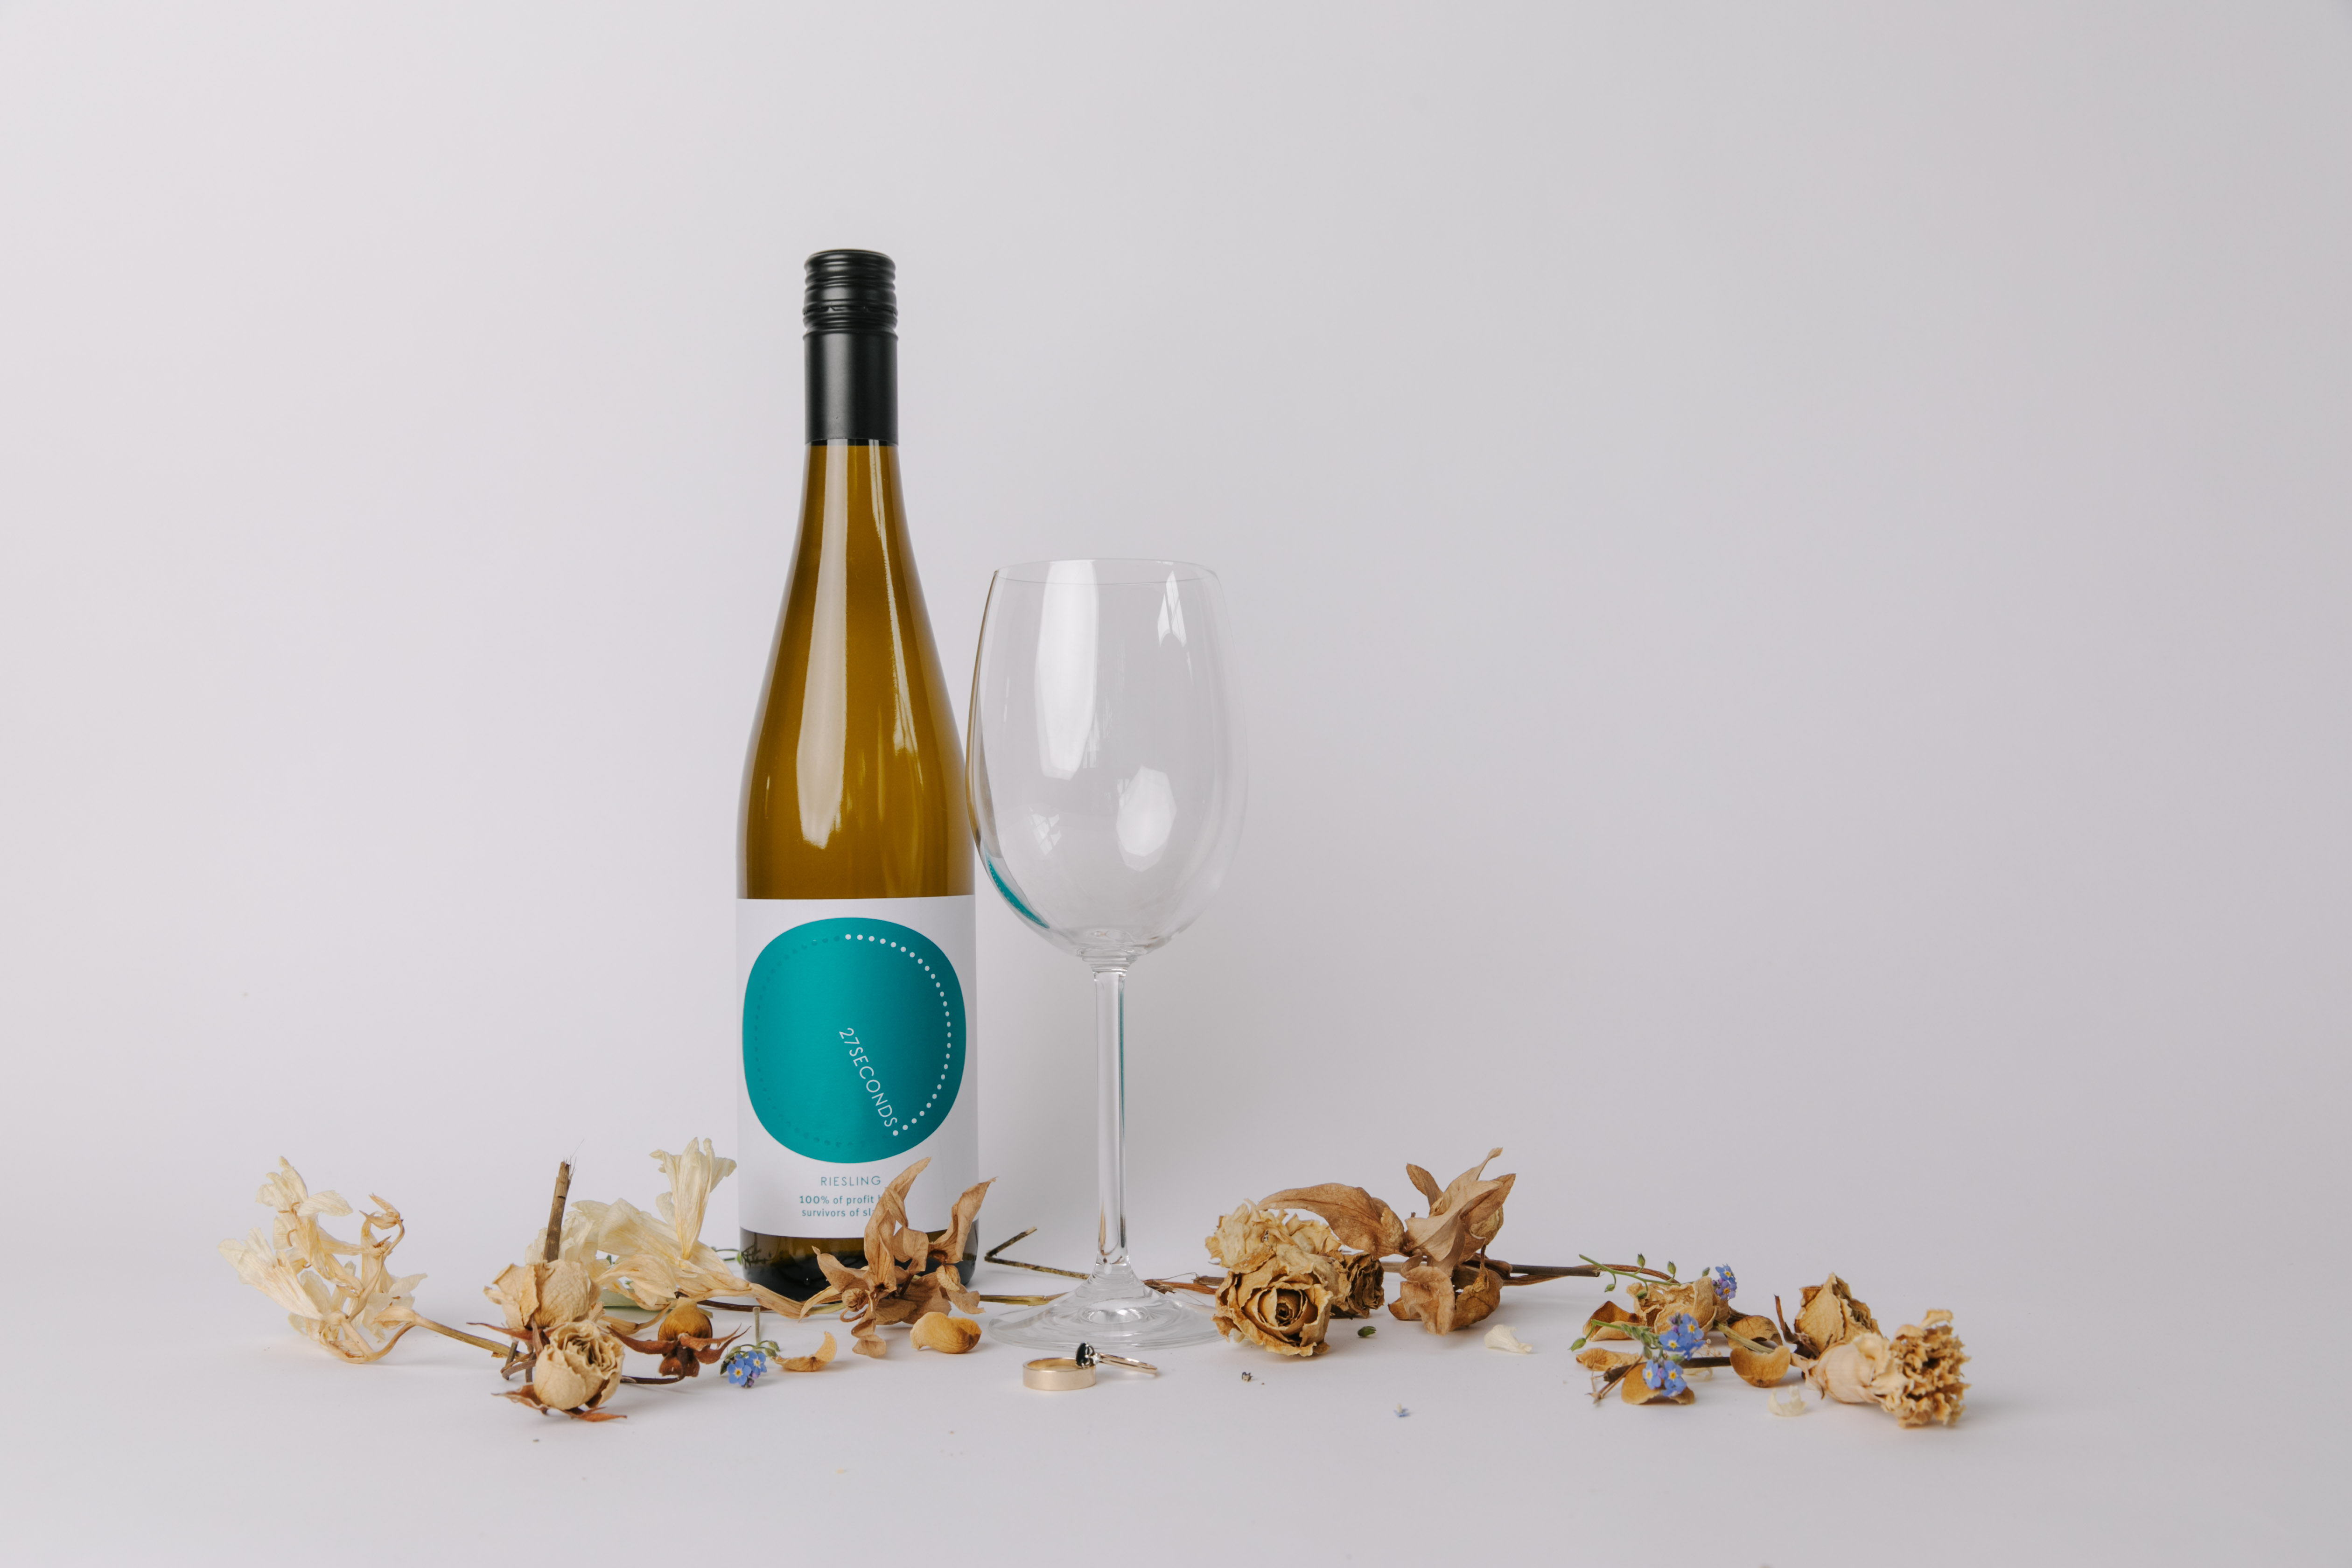 27 Seconds Riesling